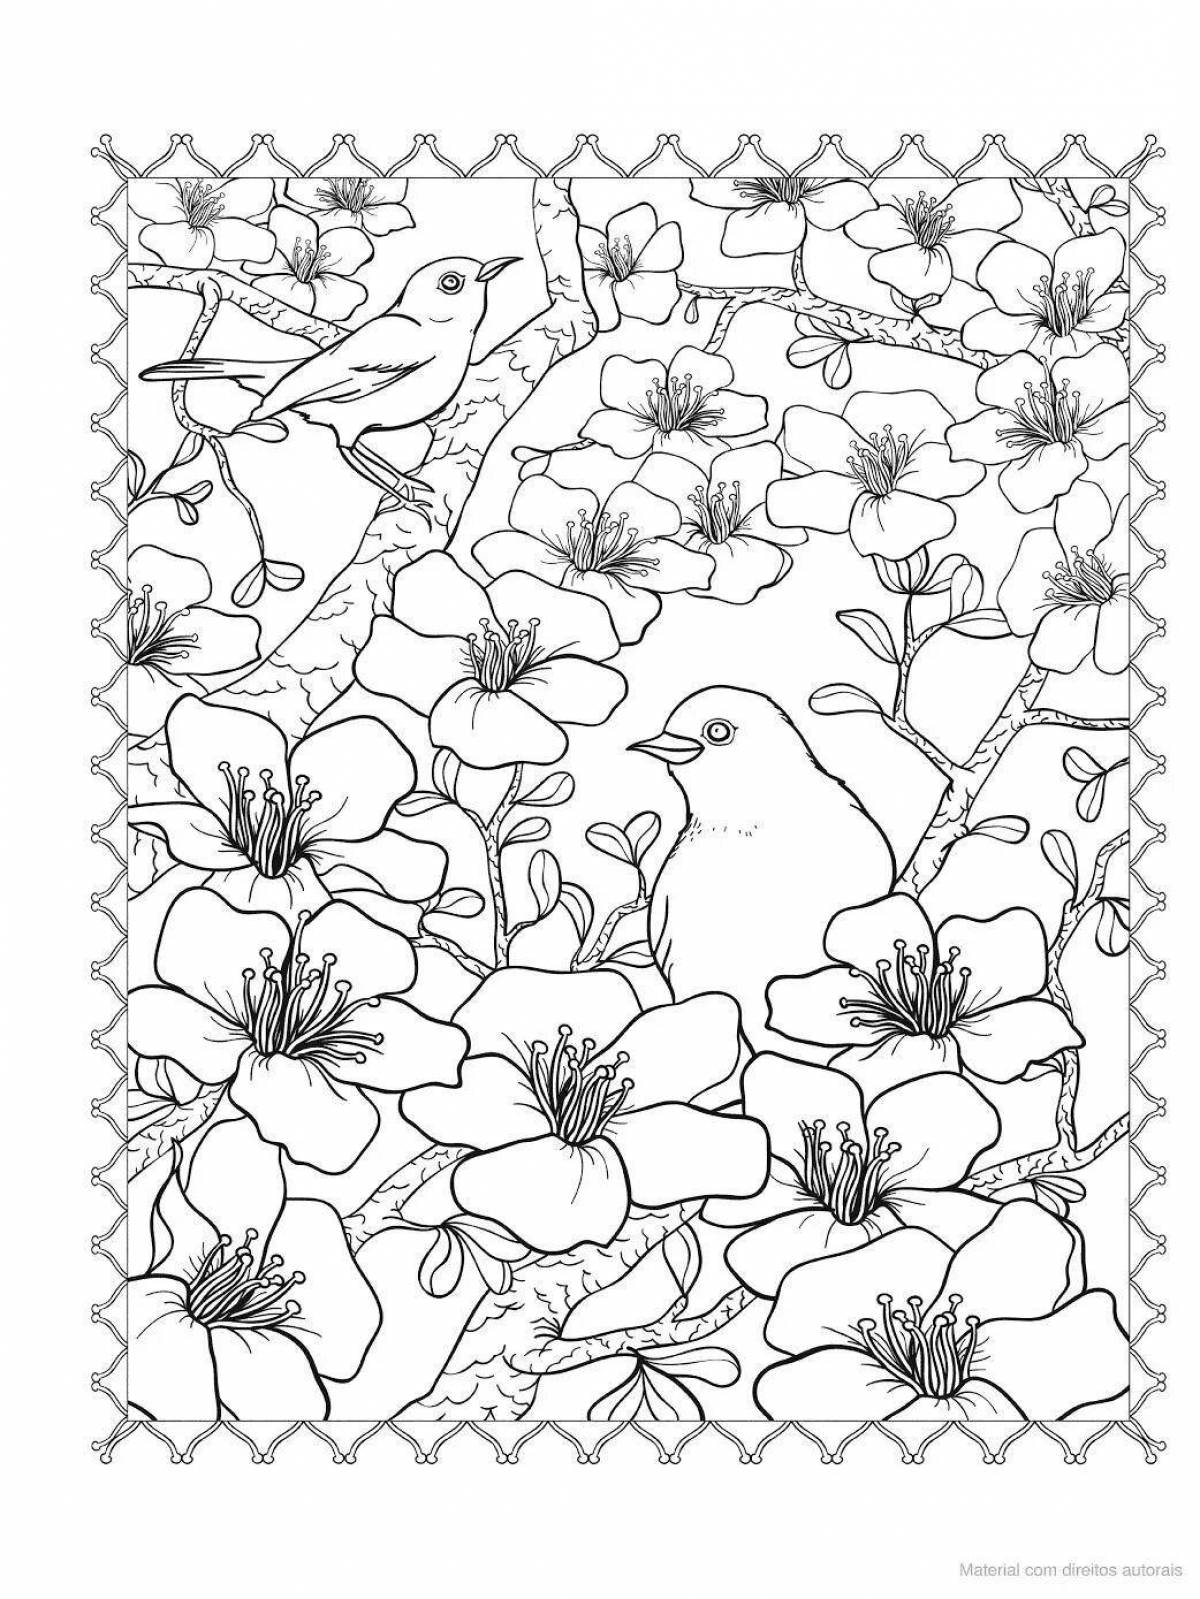 Relaxing spring anti-stress coloring book